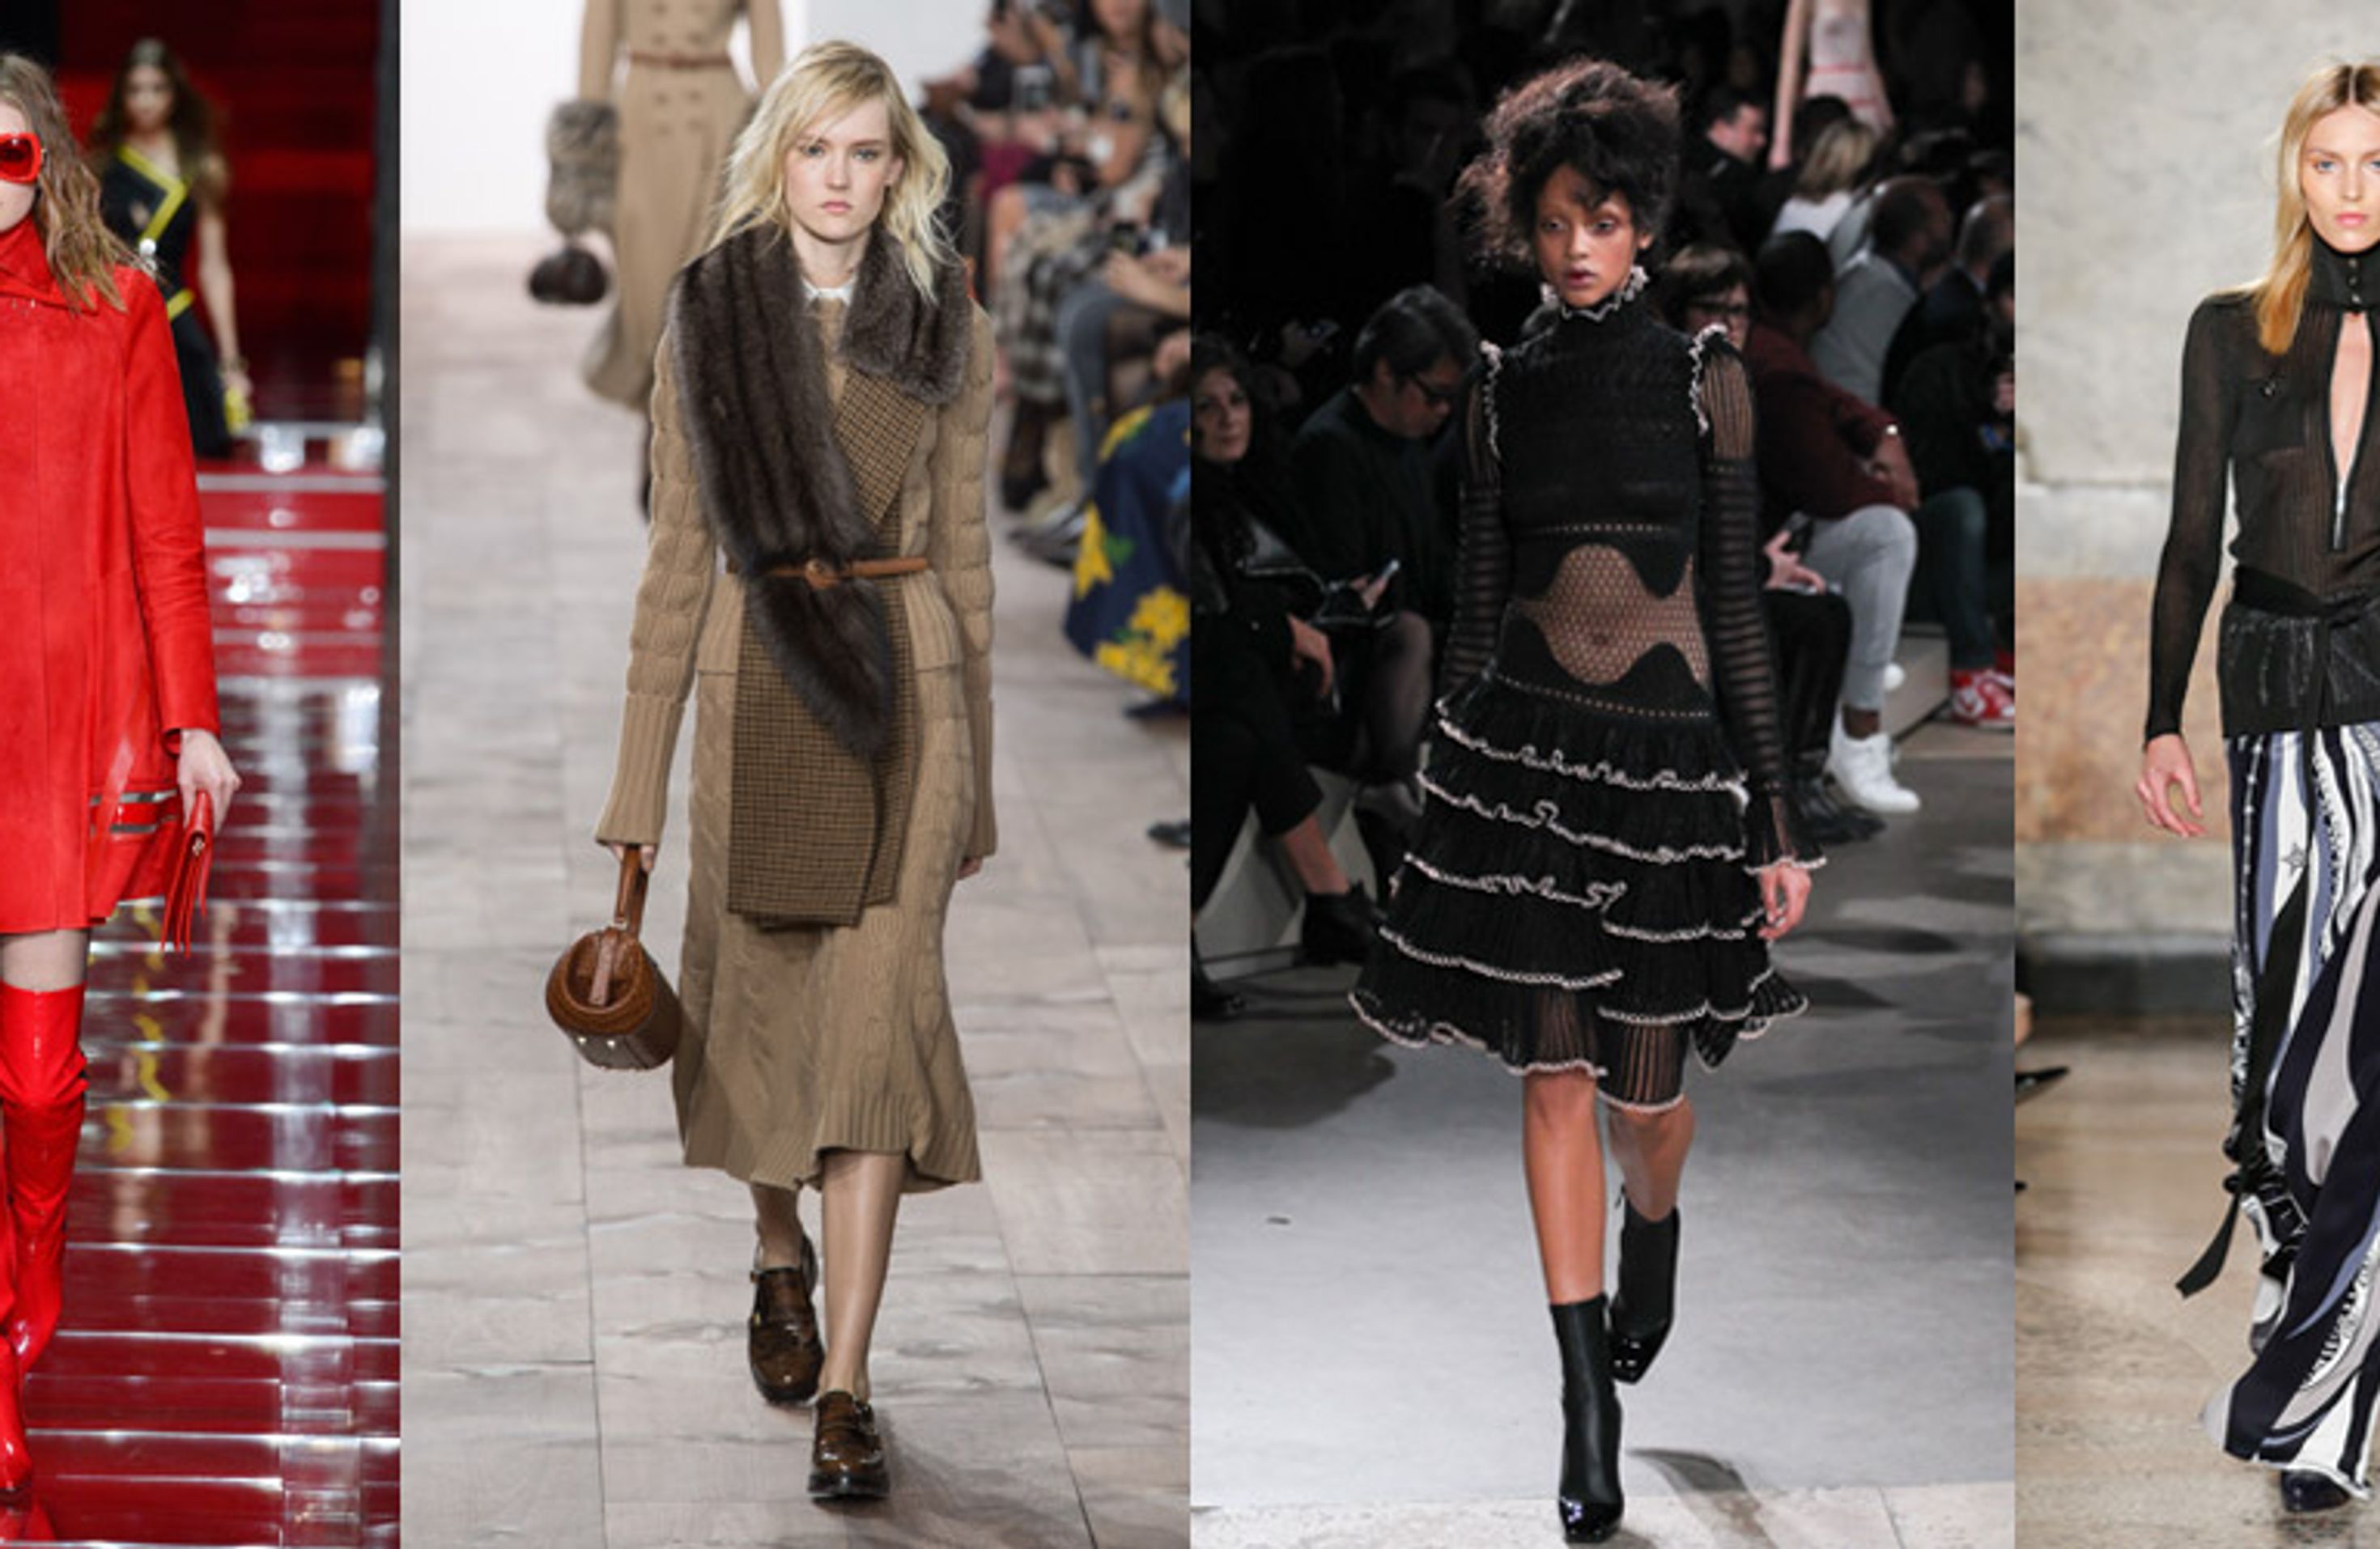 10 Of The Best Fashion Trends For Autumn/Winter 2015